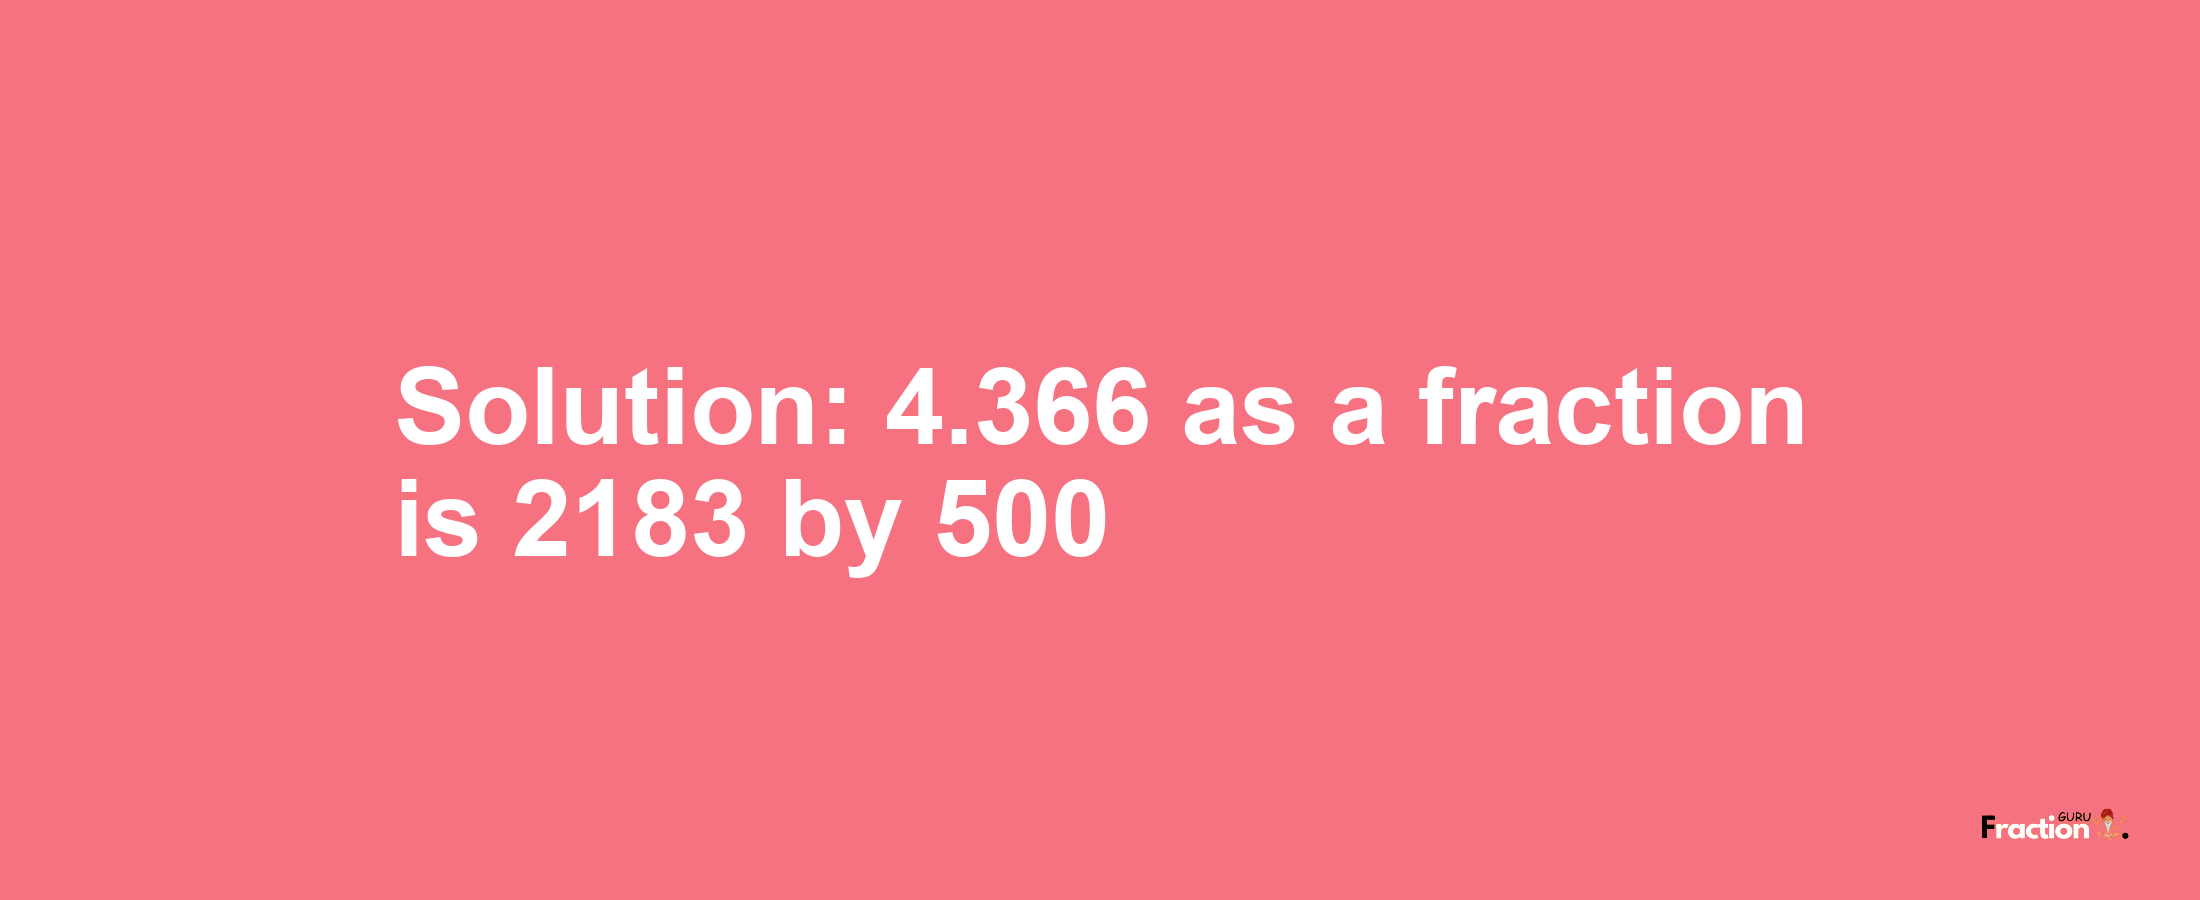 Solution:4.366 as a fraction is 2183/500